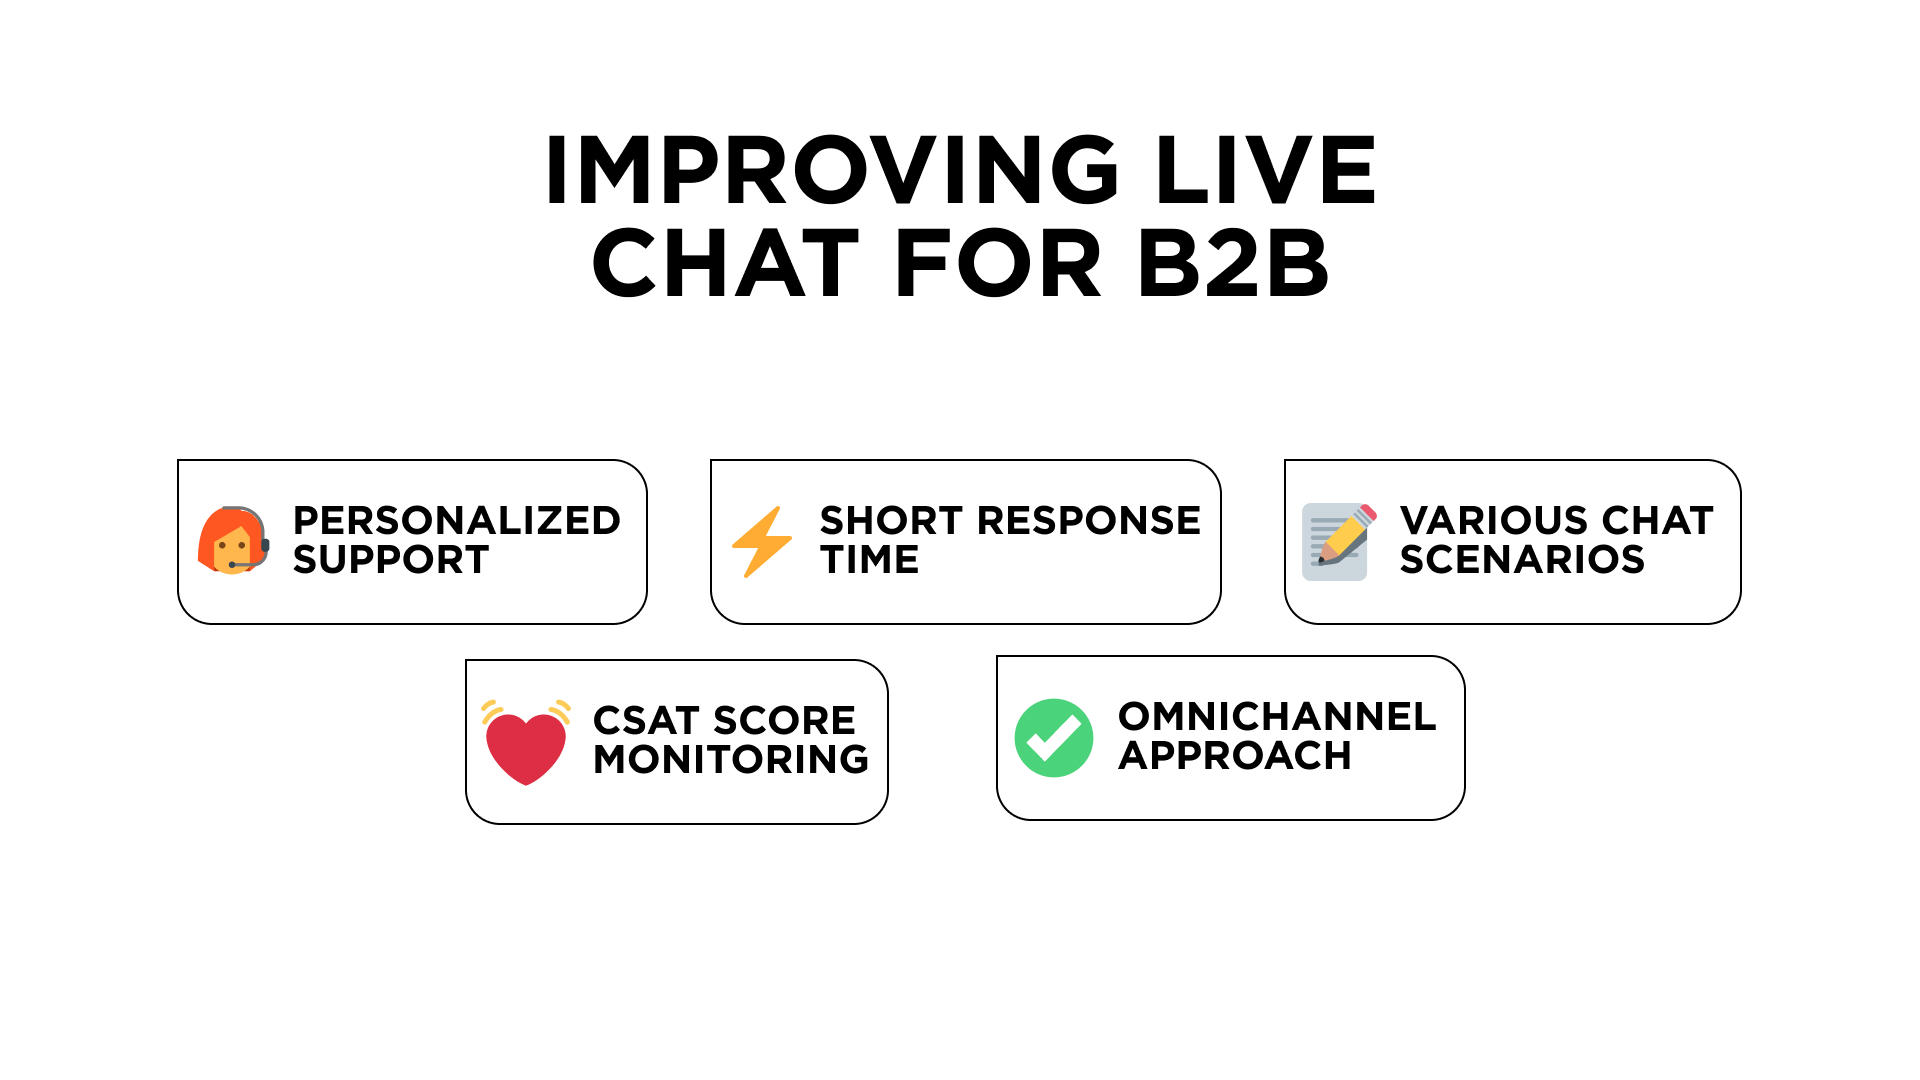 Live chat for b2b best practices